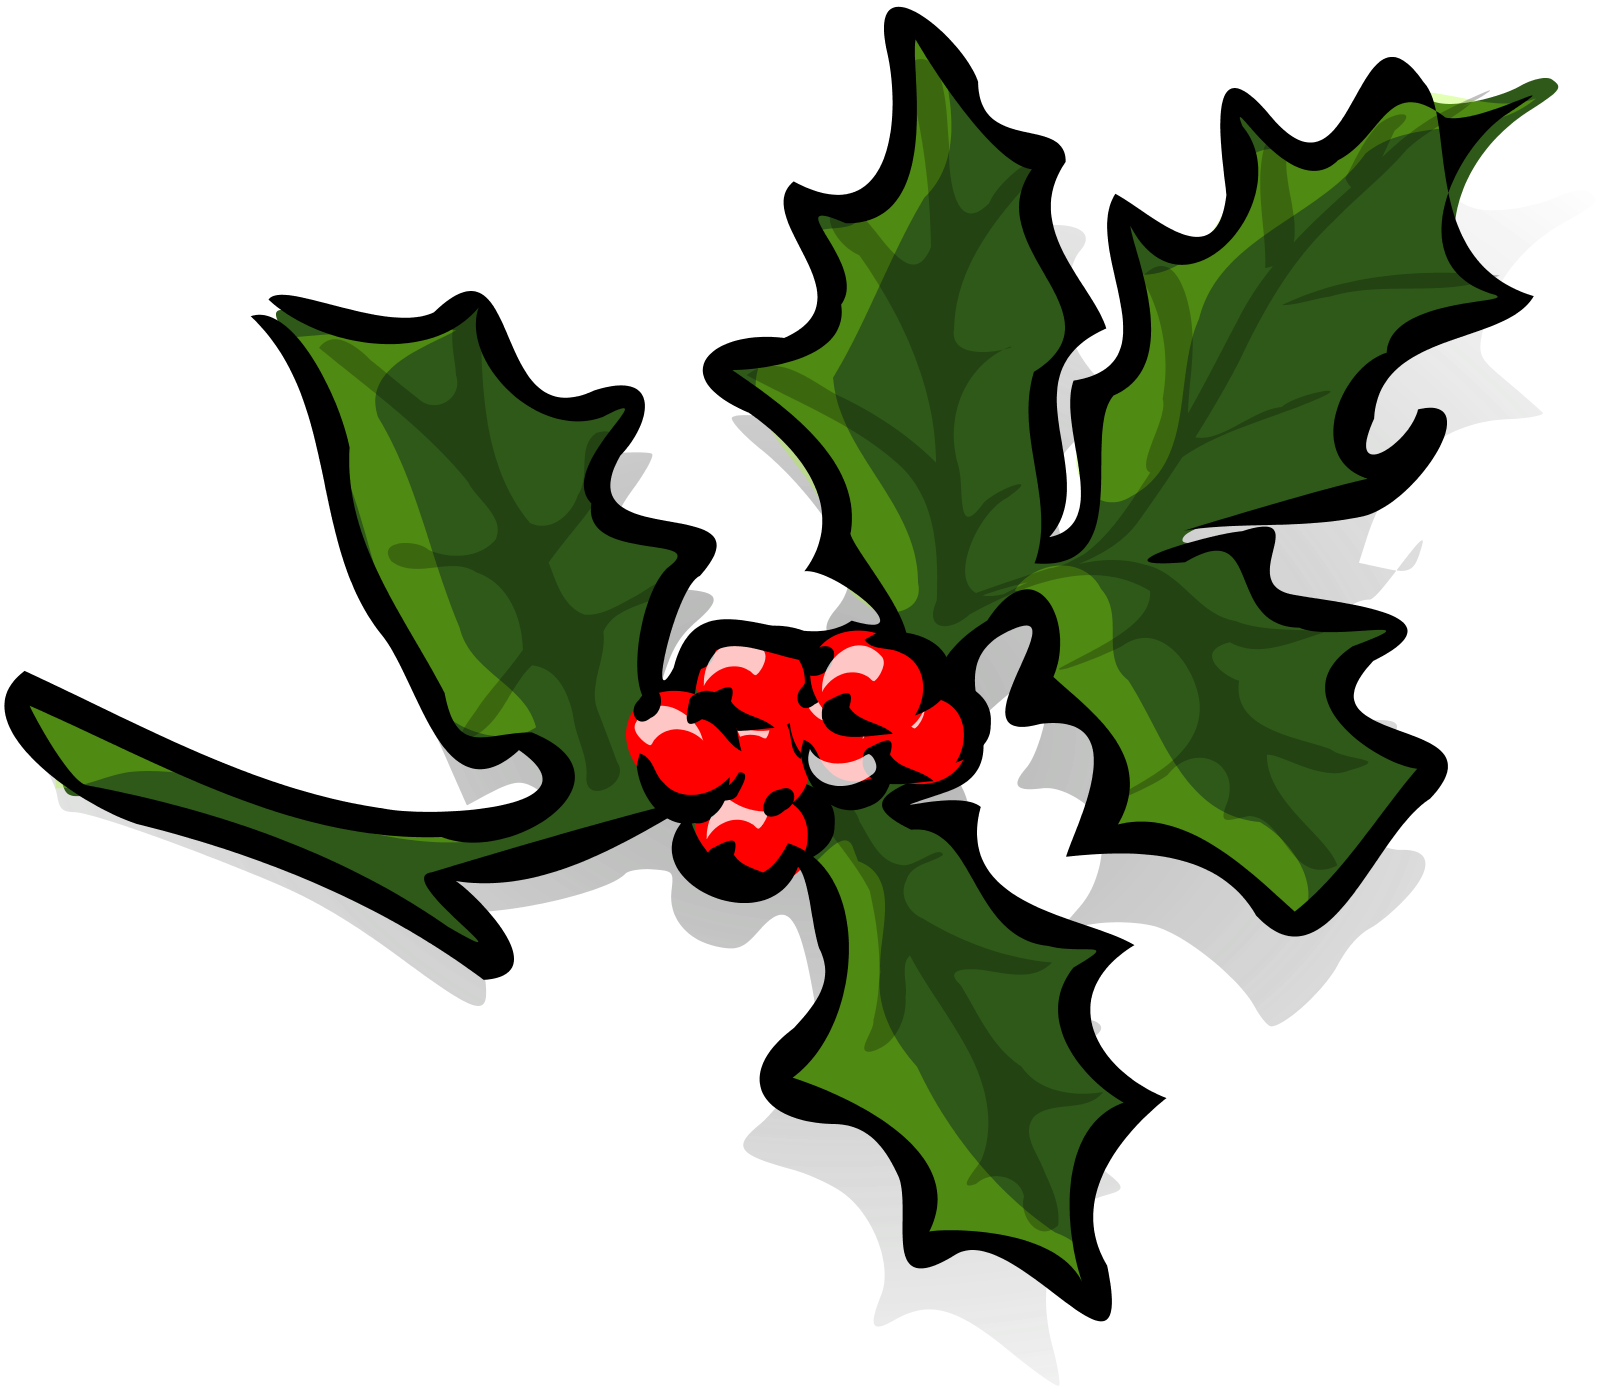 microsoft office clipart holly - photo #2